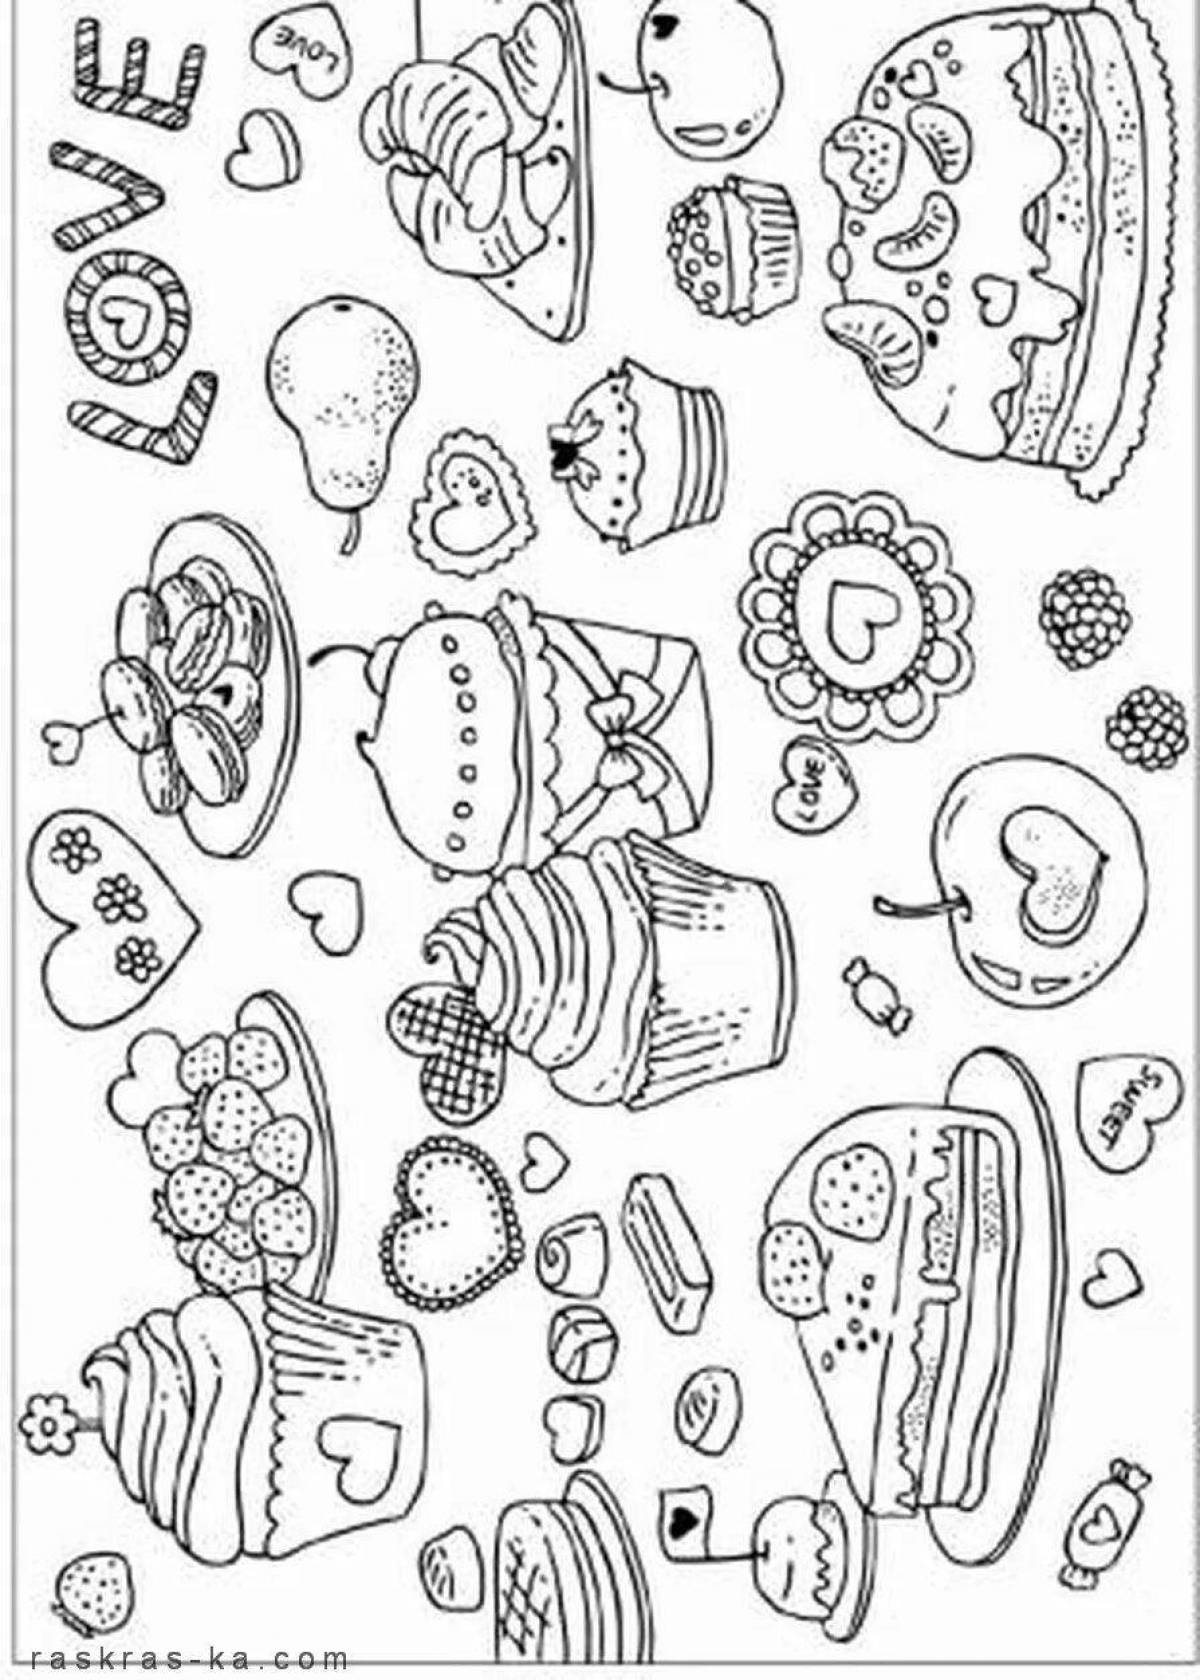 Awesome sweet world coloring page